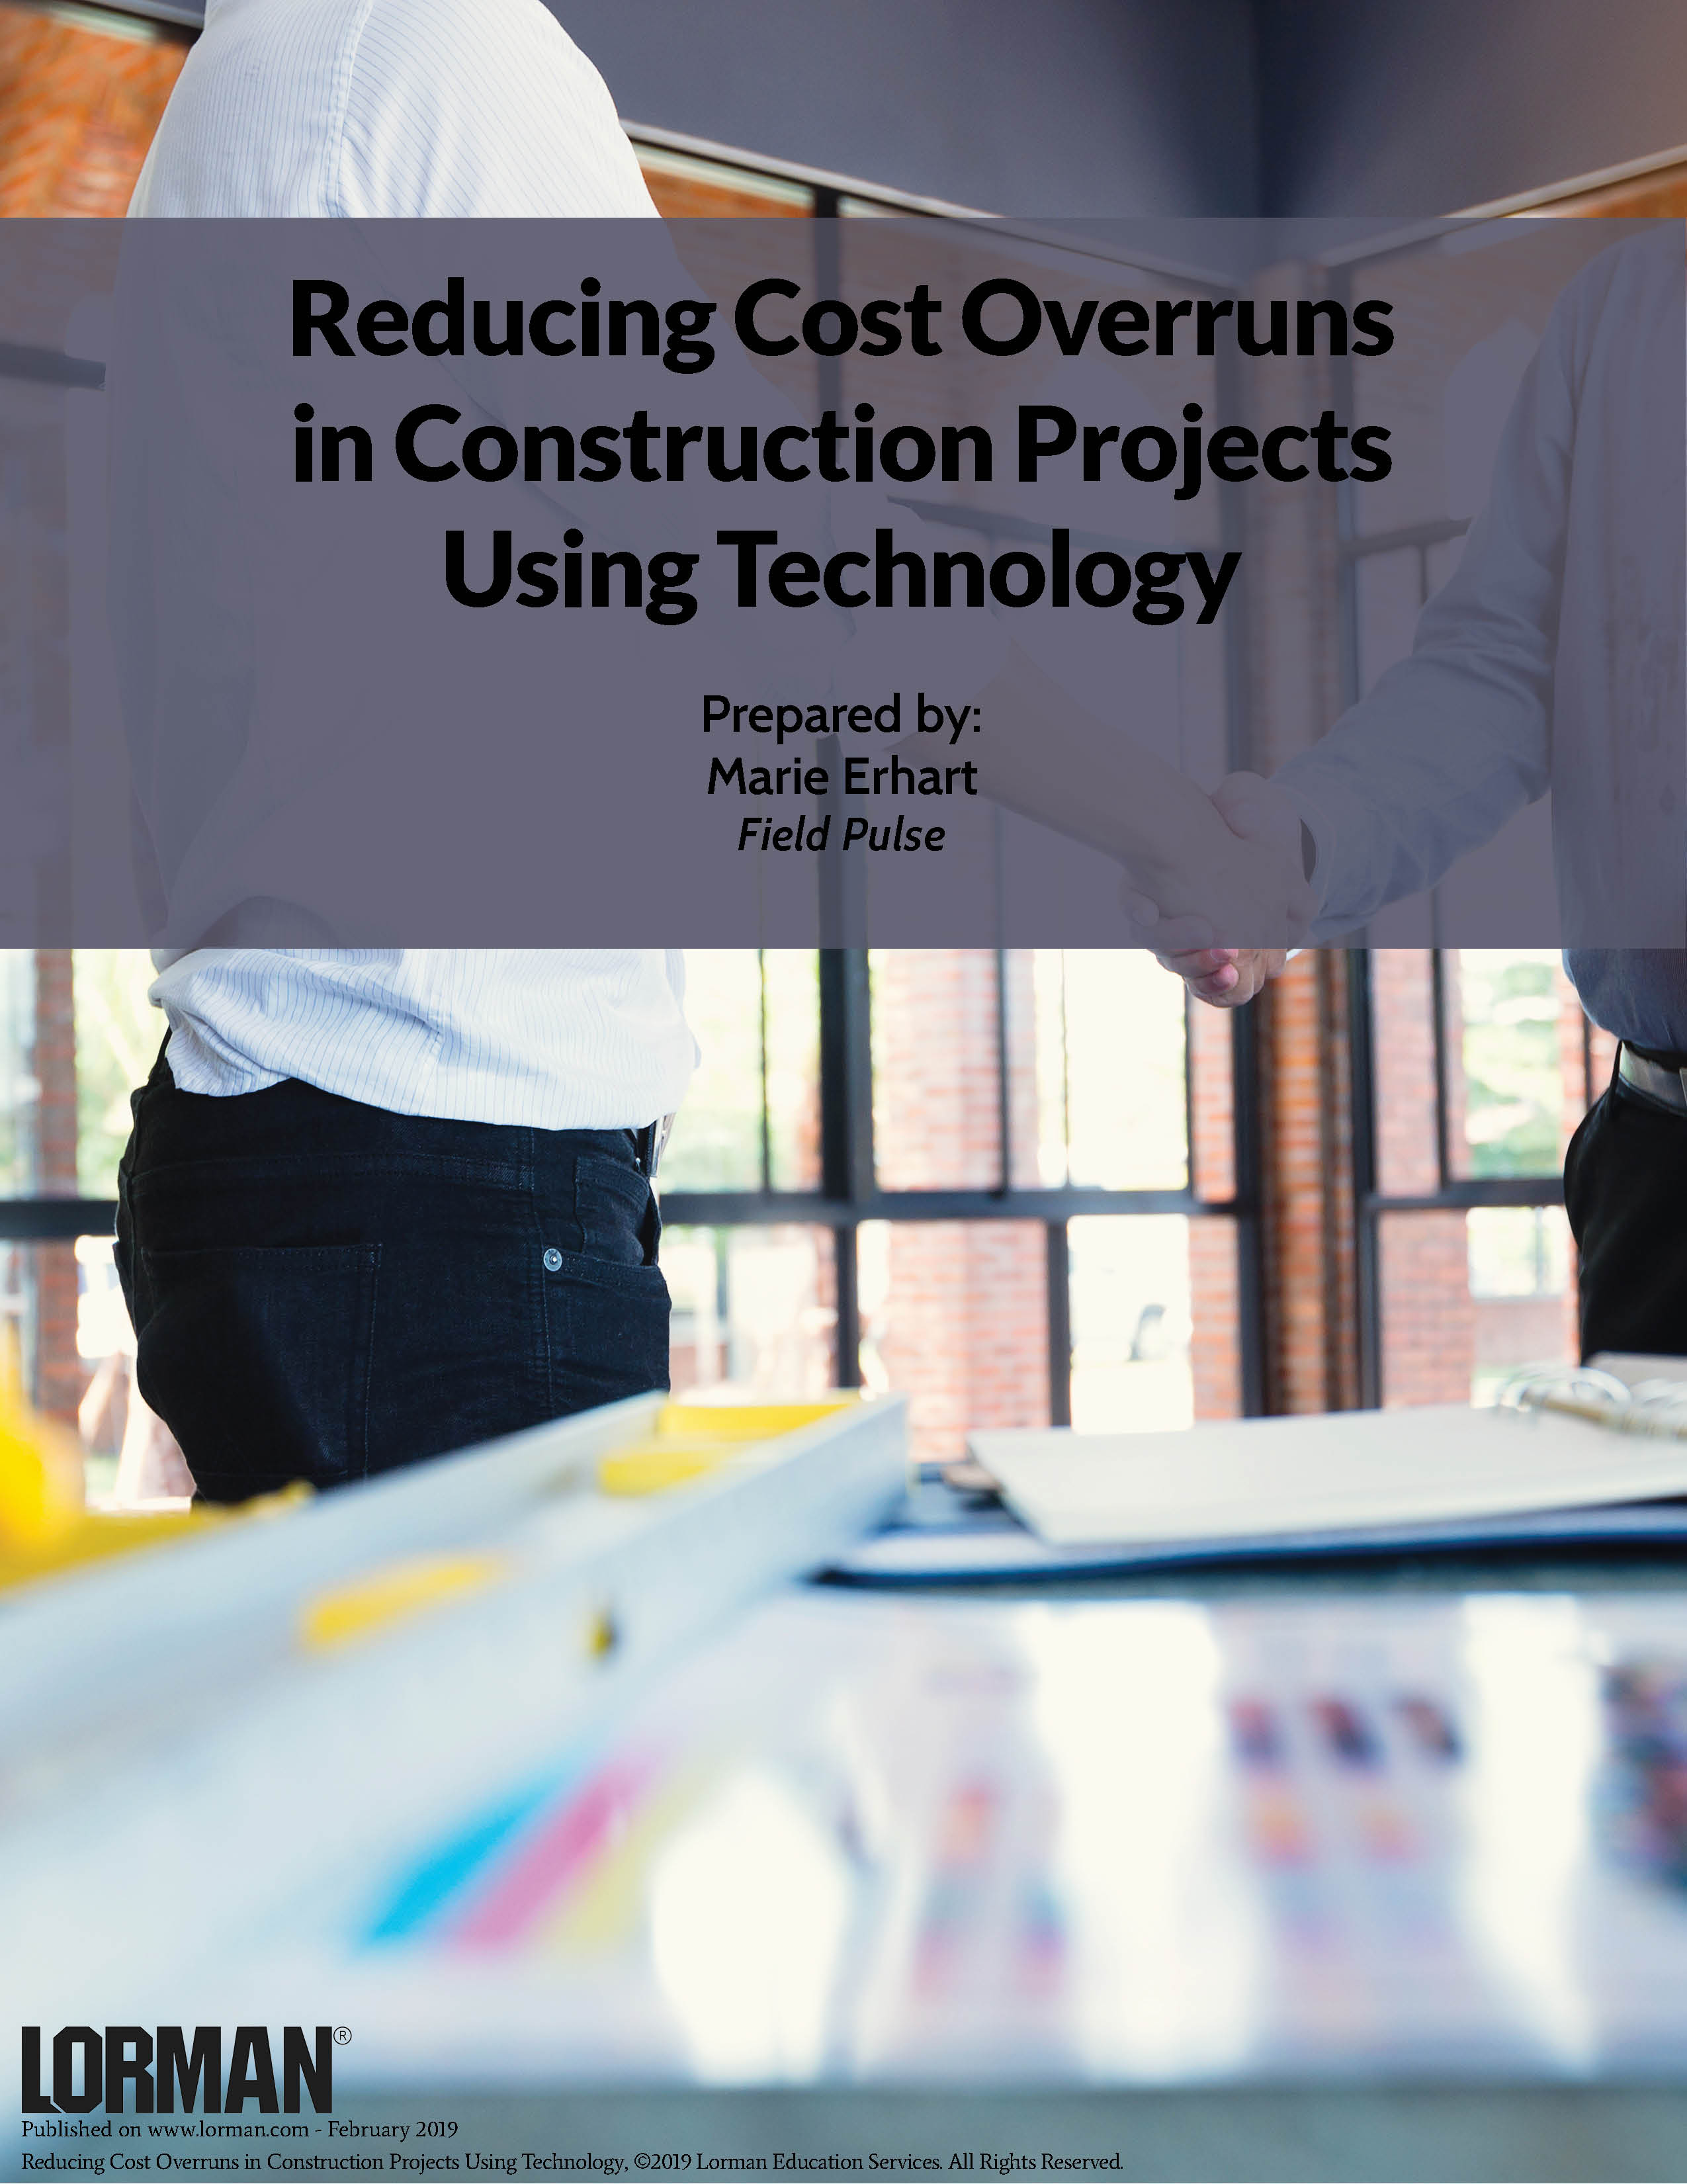 Reducing Cost Overruns in Construction Projects Using Technology